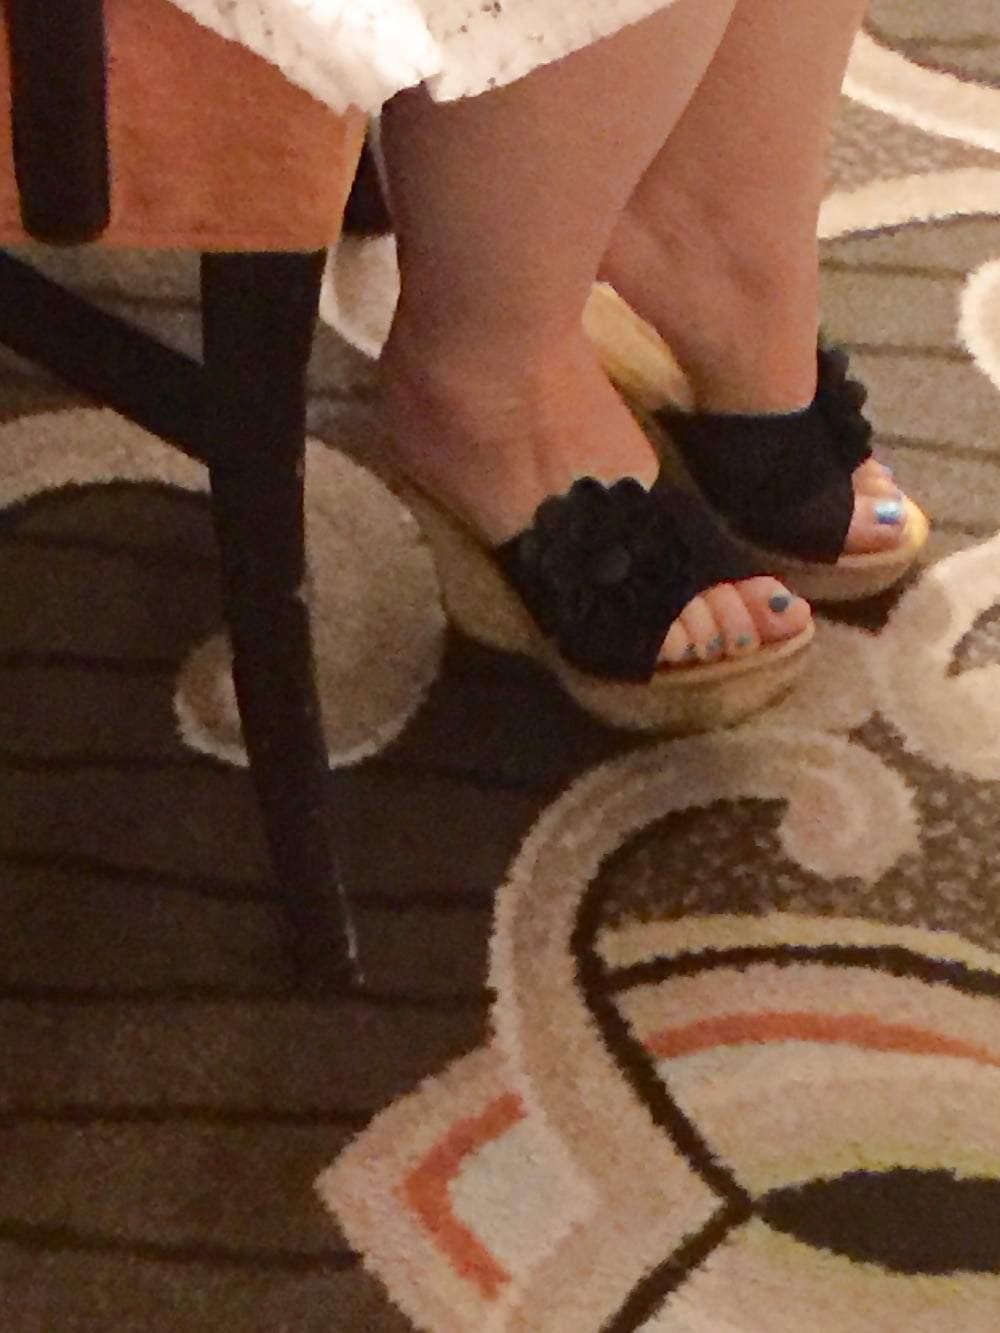 XXX Wife's sexy feet in wedges playing in Vegas